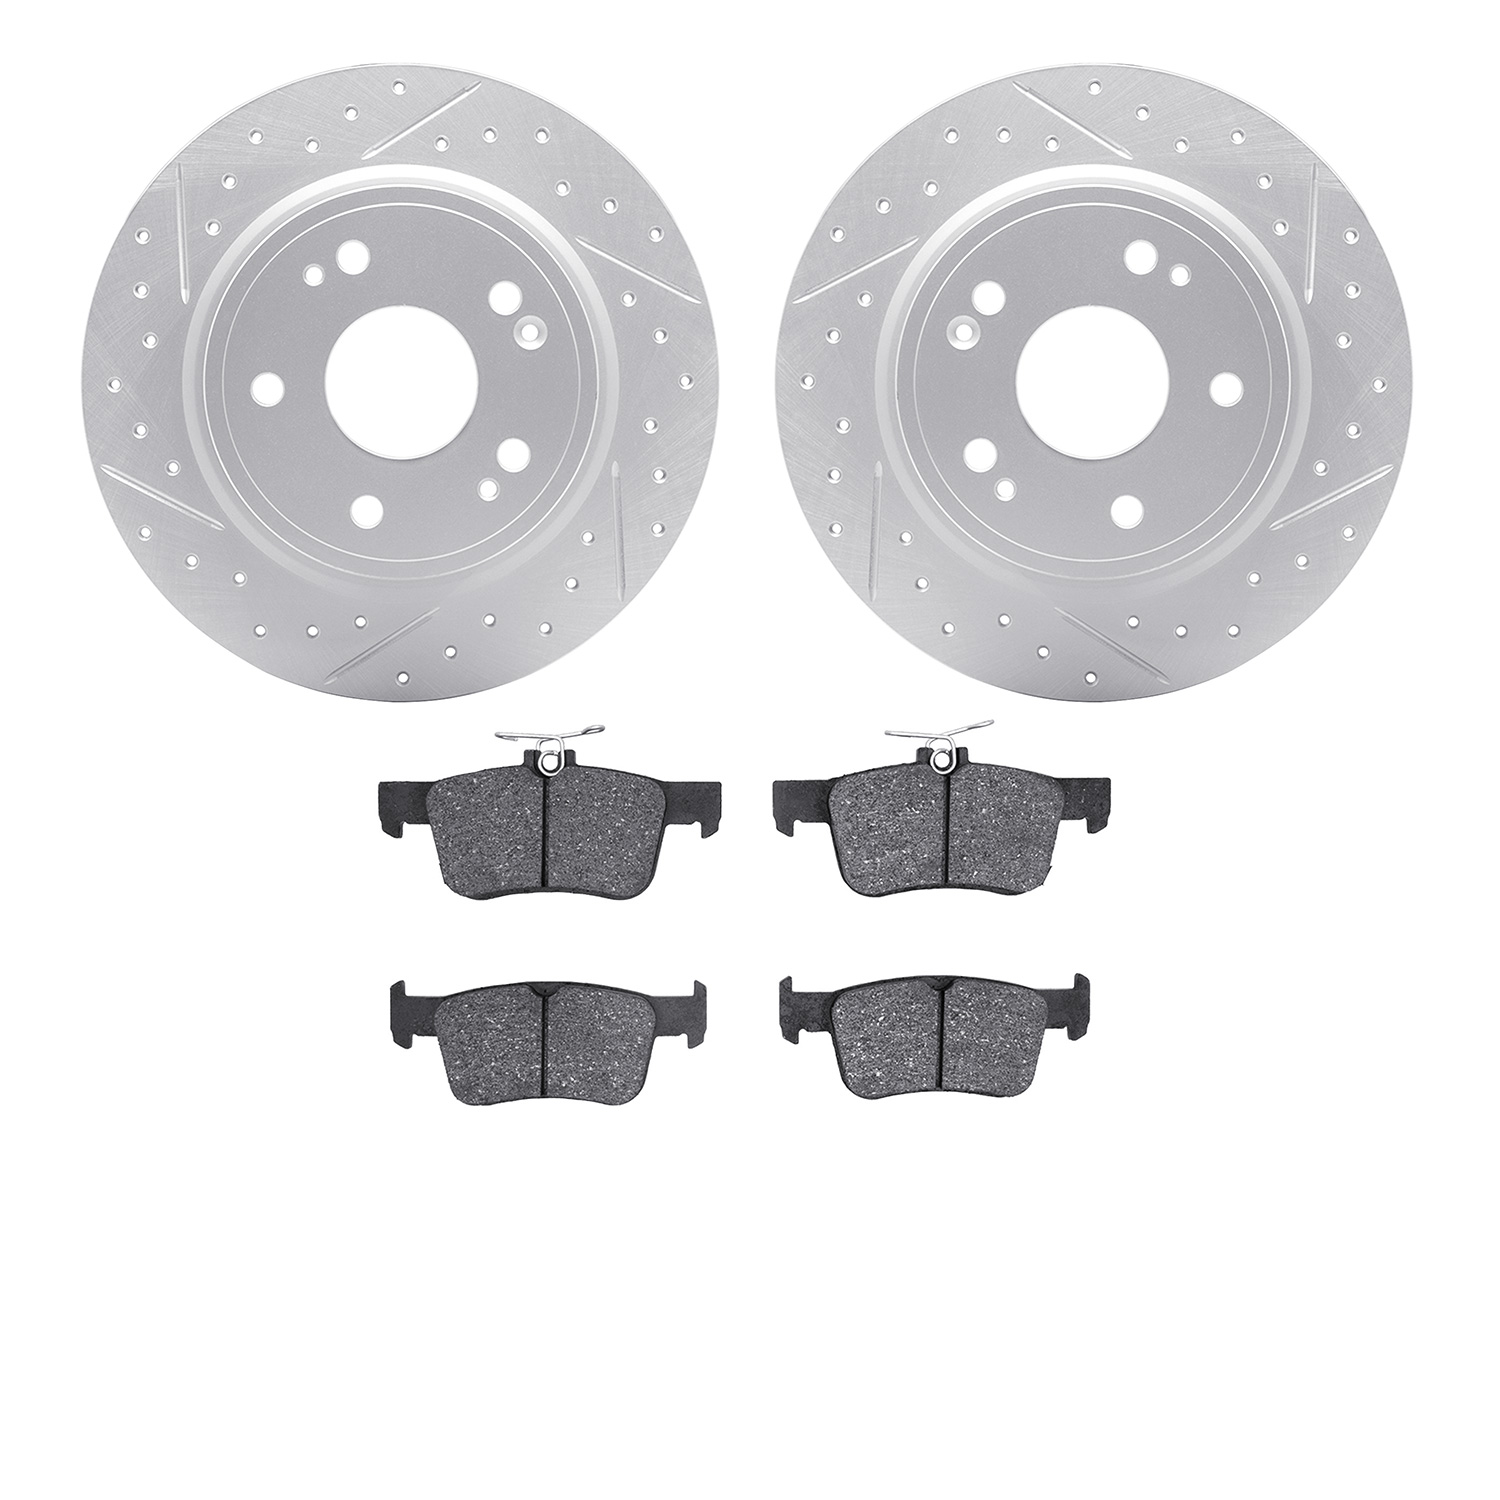 2502-59120 Geoperformance Drilled/Slotted Rotors w/5000 Advanced Brake Pads Kit, Fits Select Acura/Honda, Position: Rear